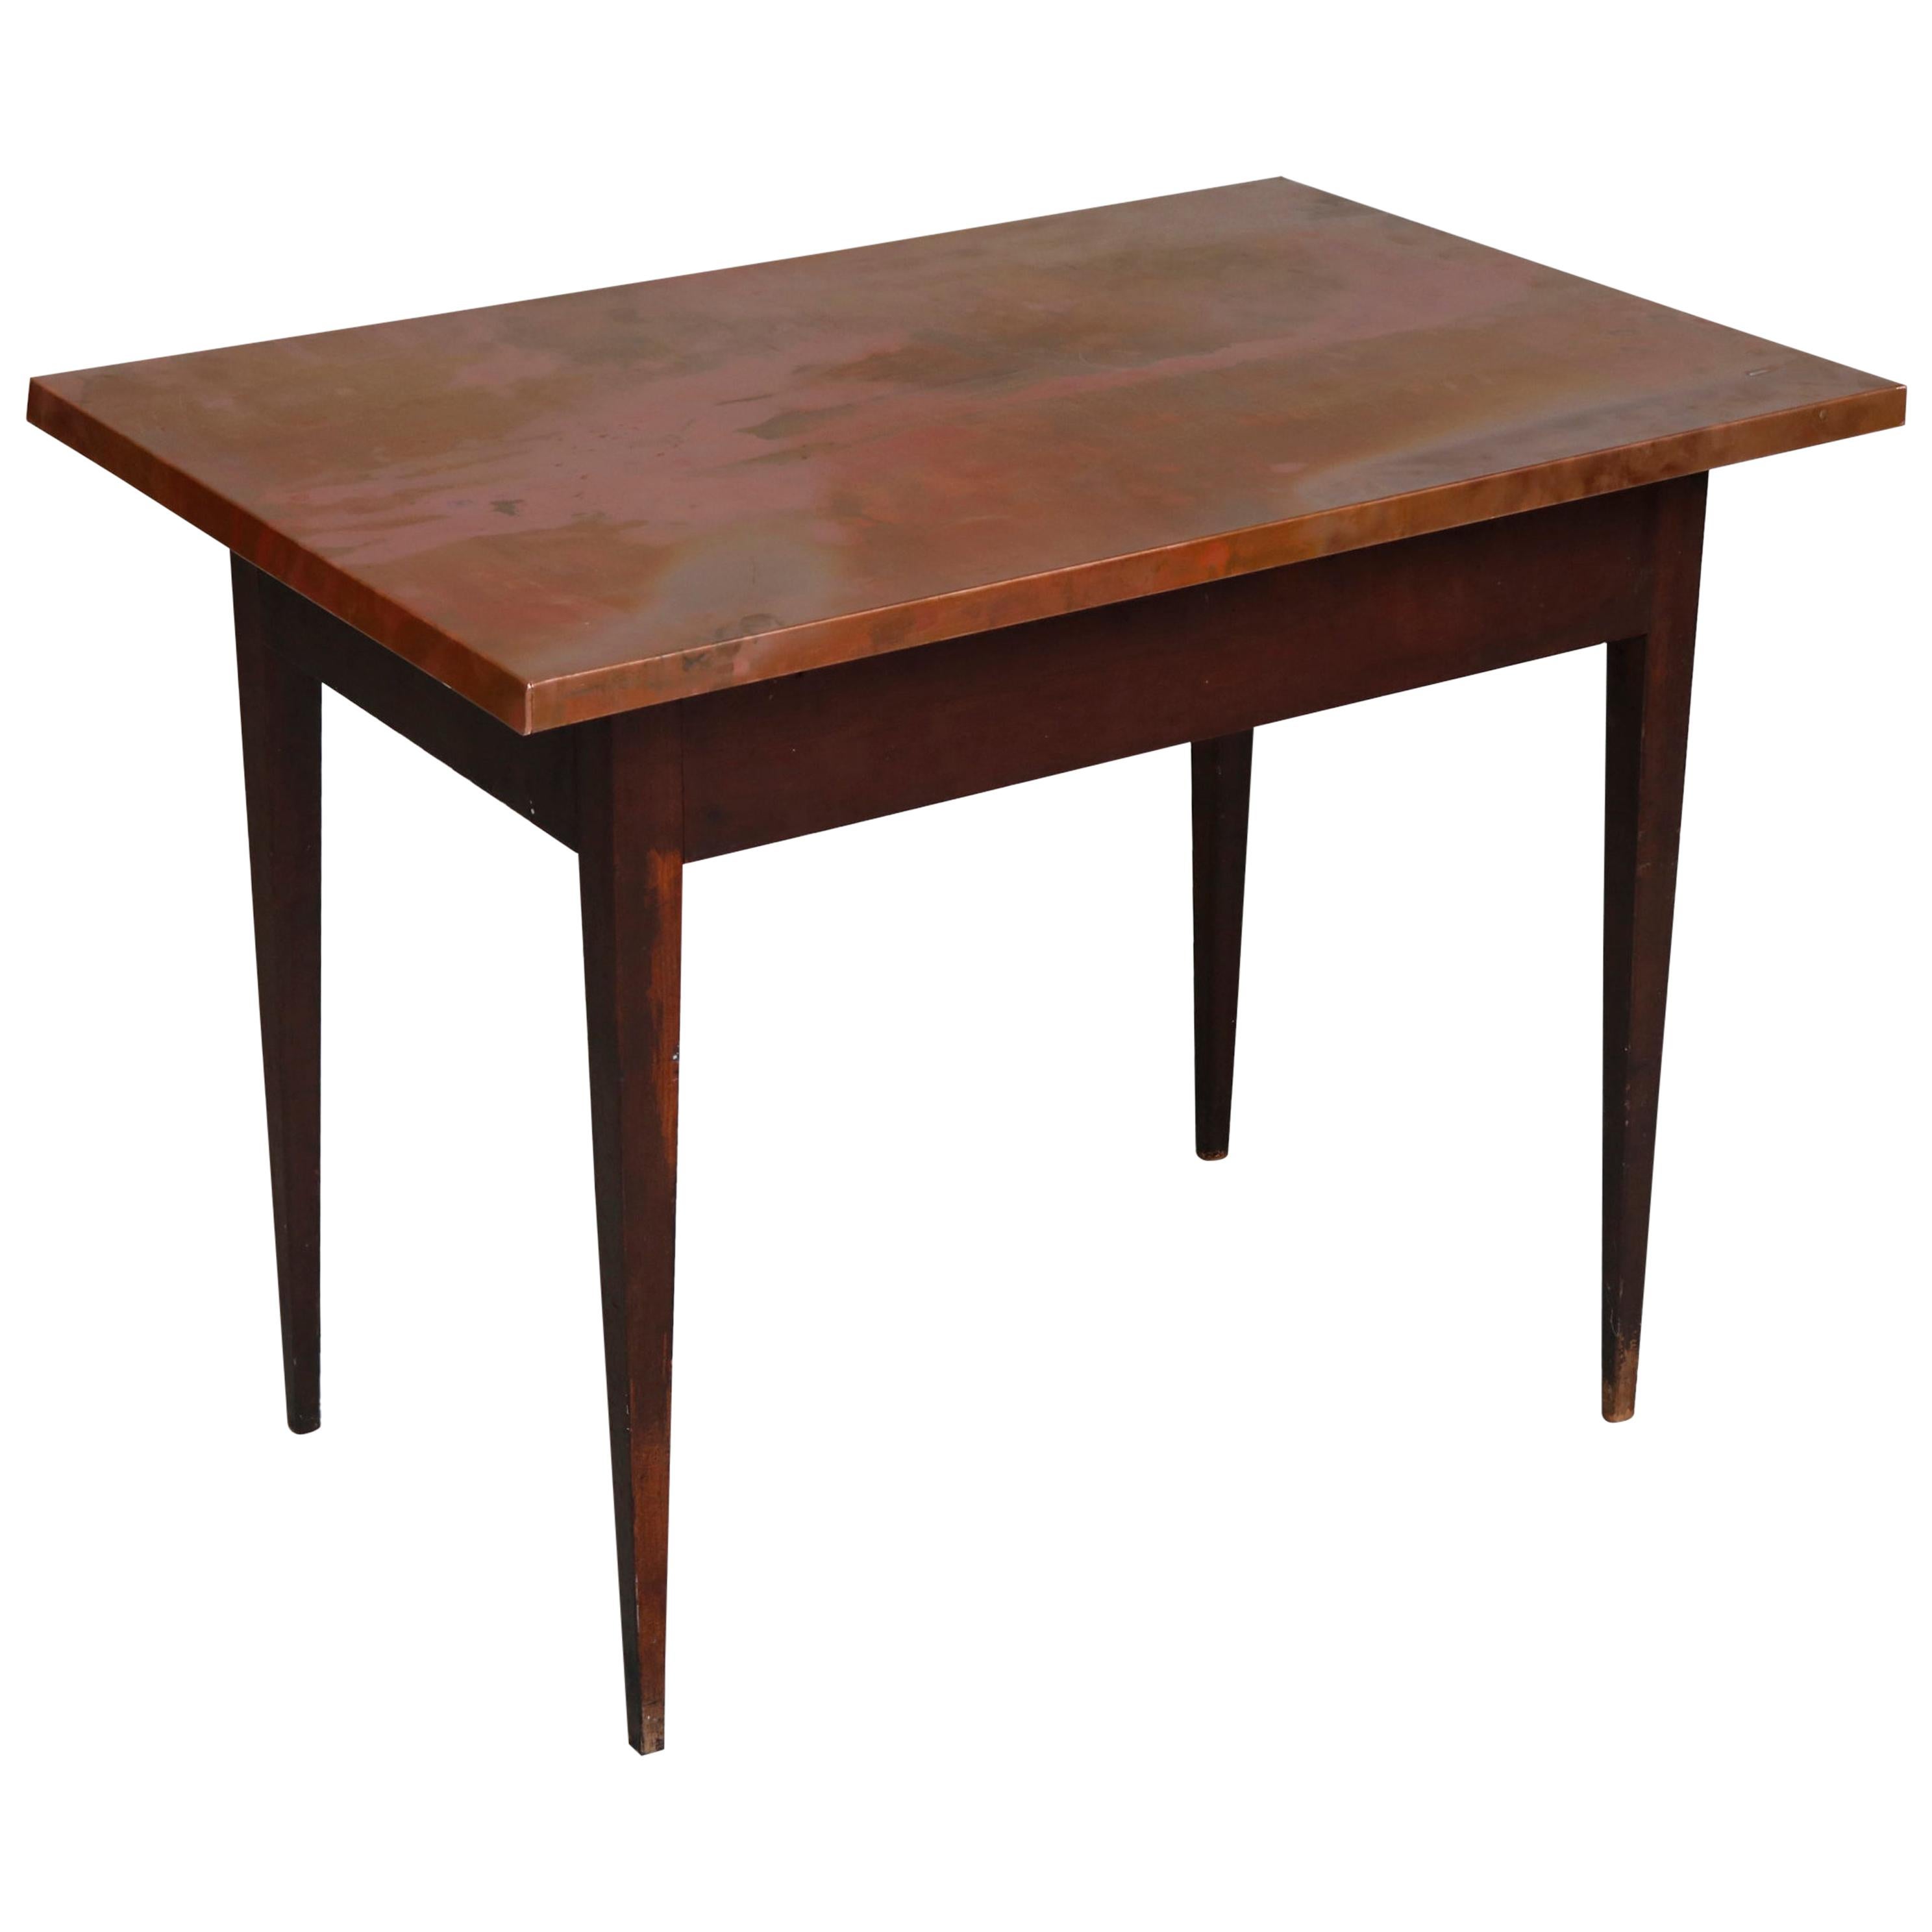 Late 19th Century Table with Copper Top